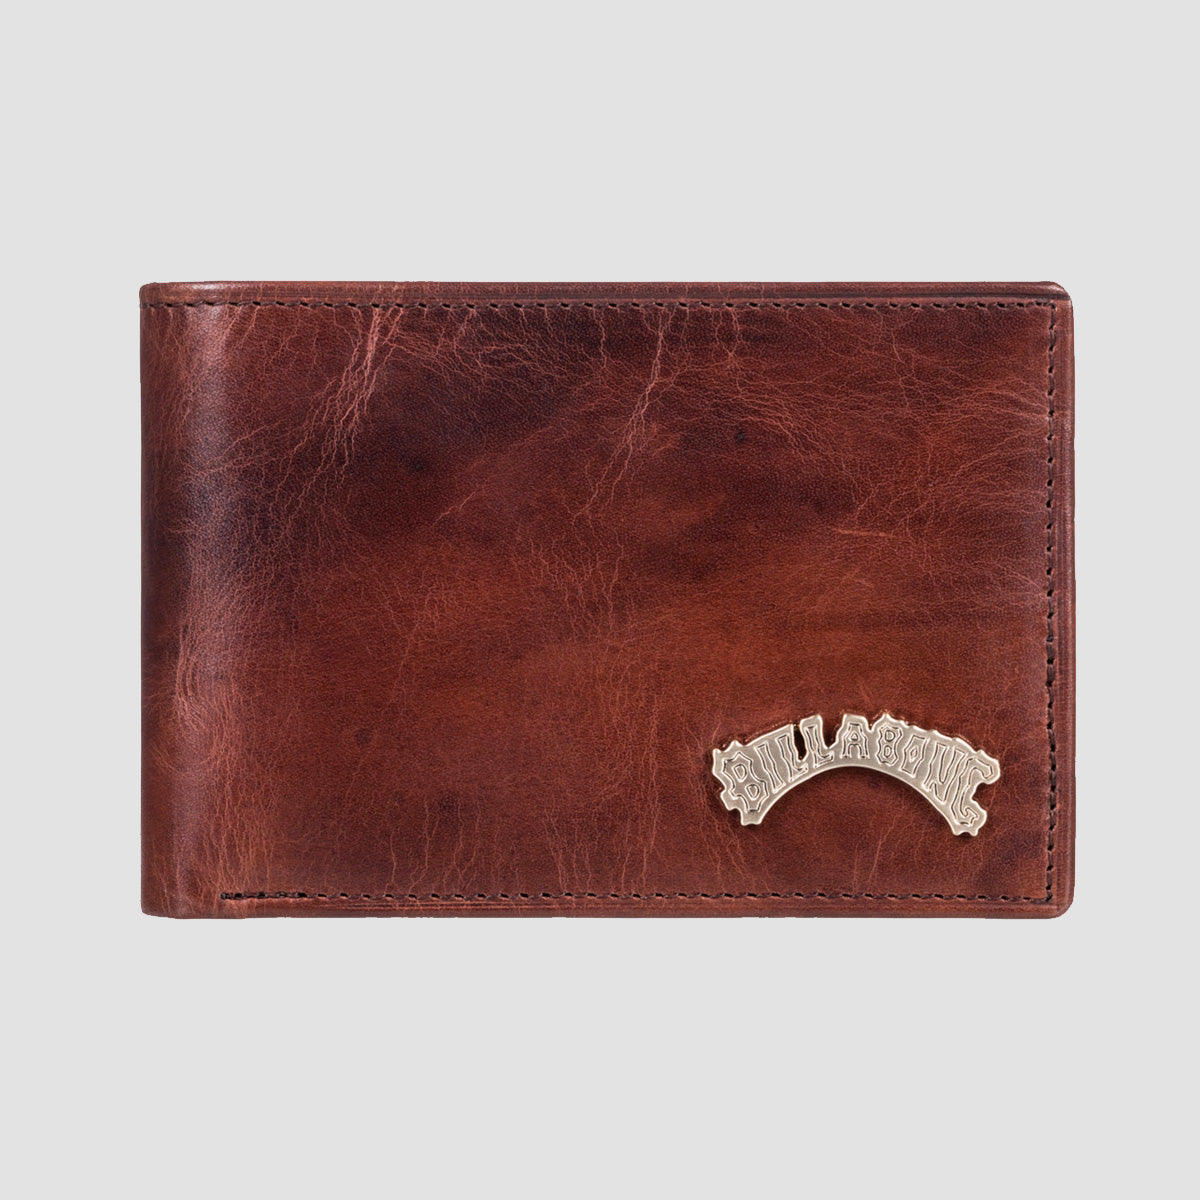 Billabong Arch Leather Wallet Chocolate